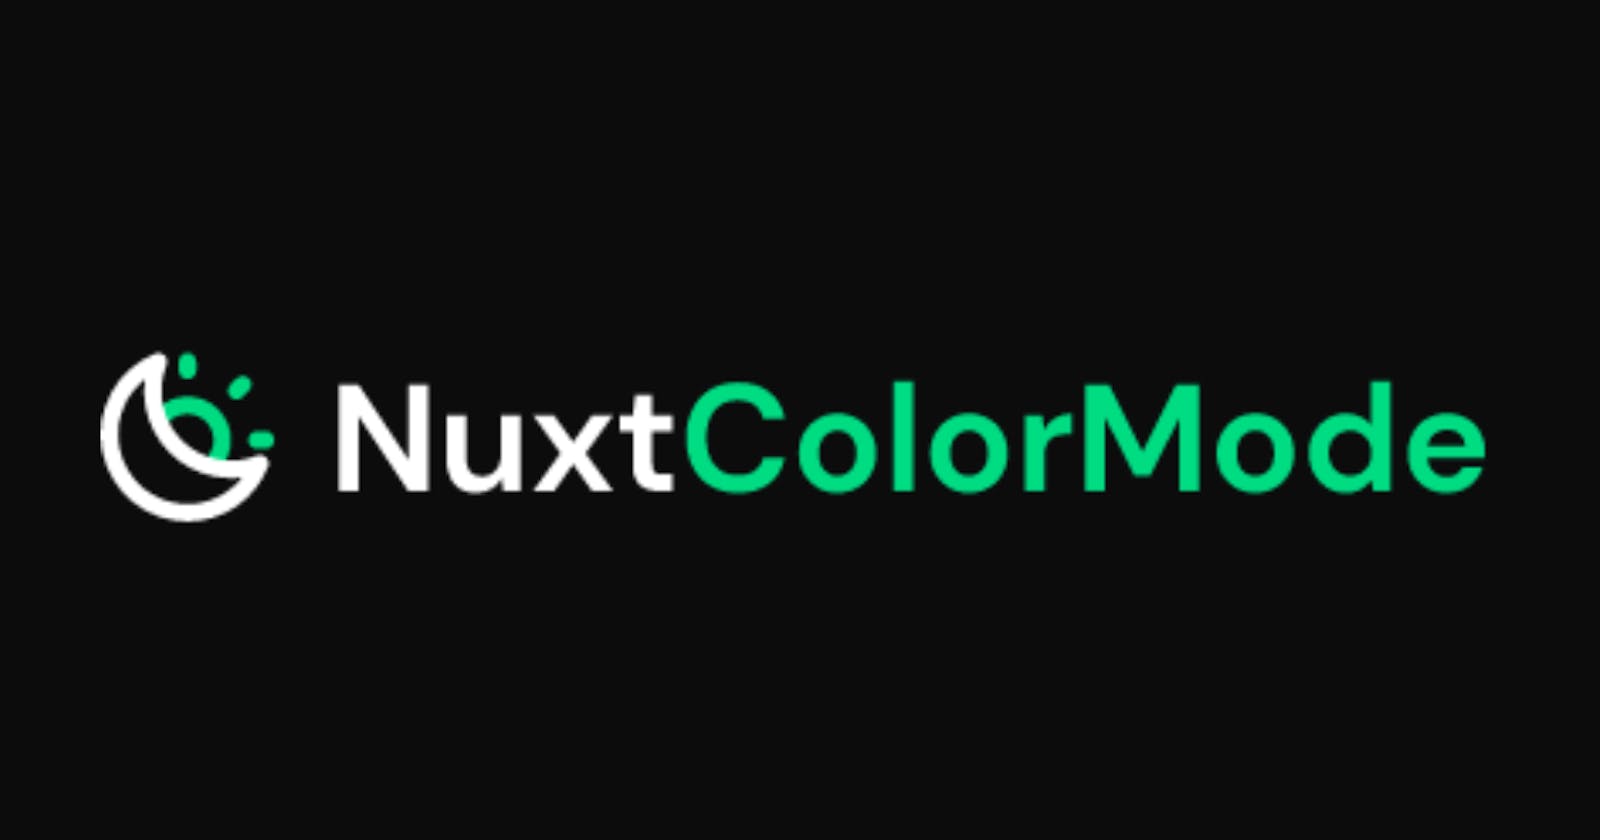 Mastering Nuxtjs Color Modes: A Step-by-Step Guide to Implement Dark Mode and Light Mode on Your Nuxt 3 Website